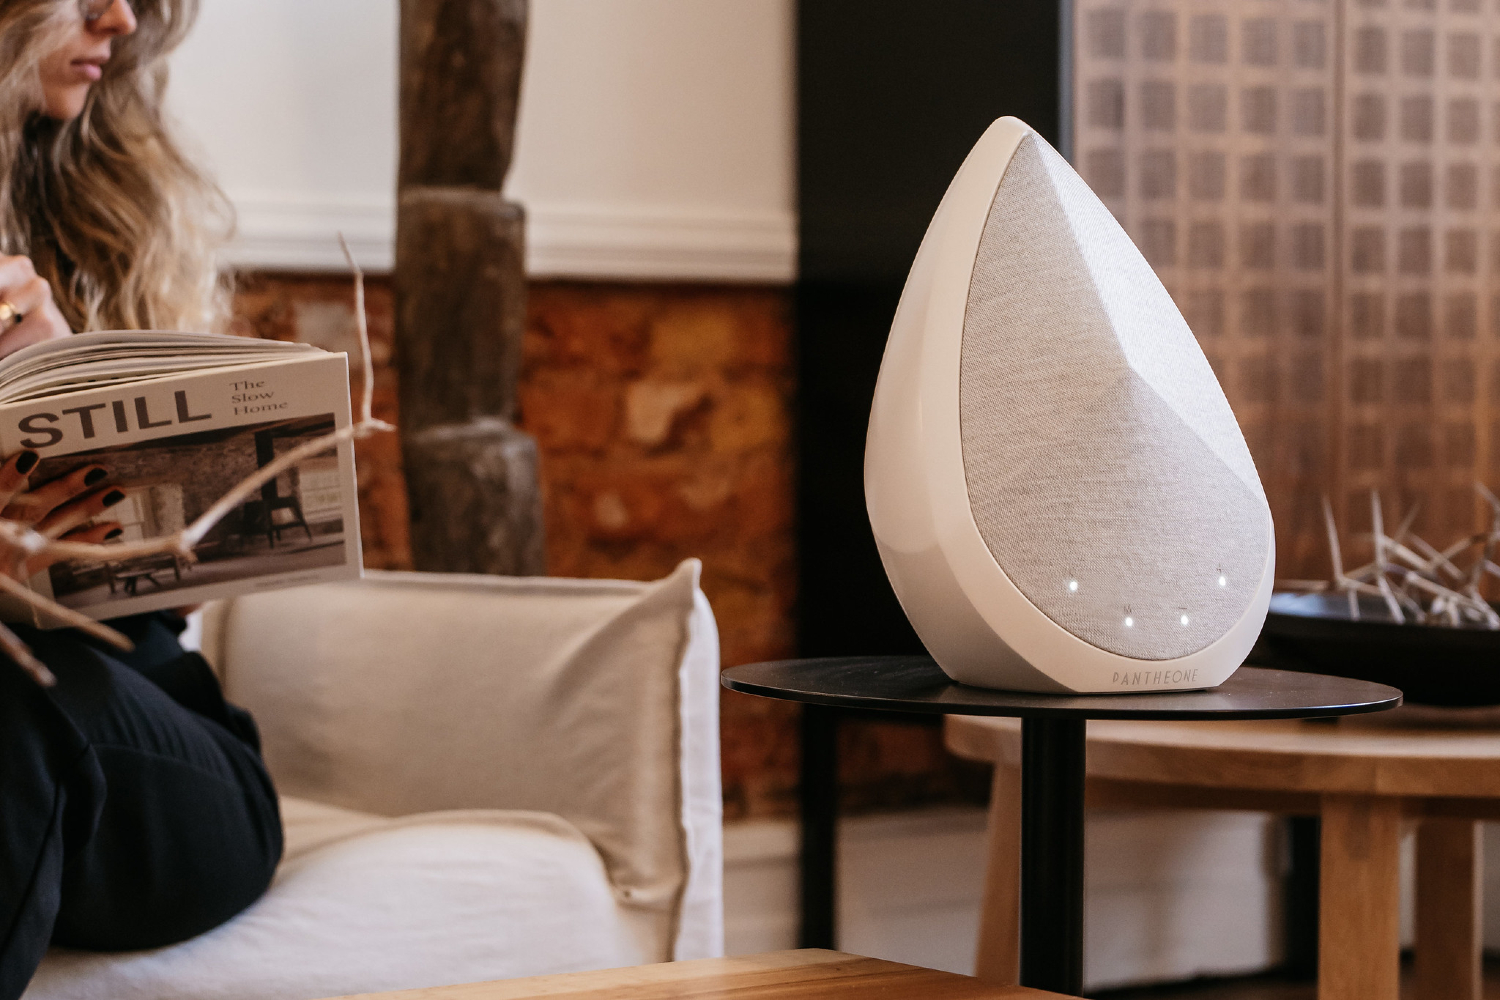 A white Pantheone Audio speaker on a table. In the background, a woman reads a hardback book on sofa.